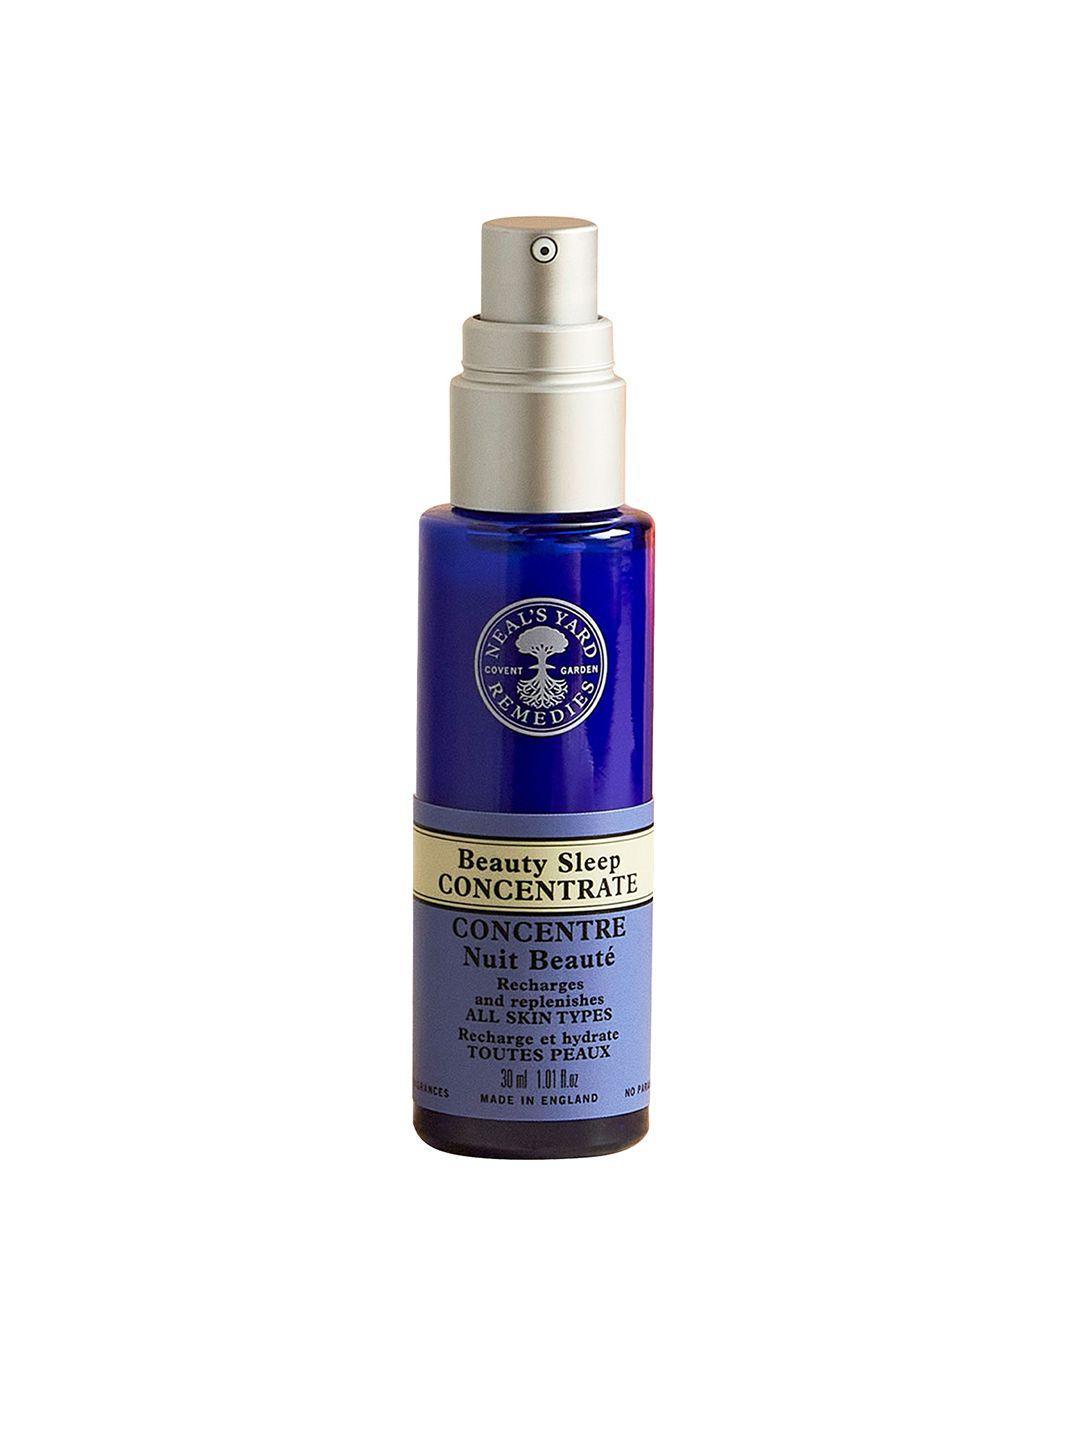 neal's yard remedies beauty sleep concentrate face serum with hyaluronic acid - 30 ml